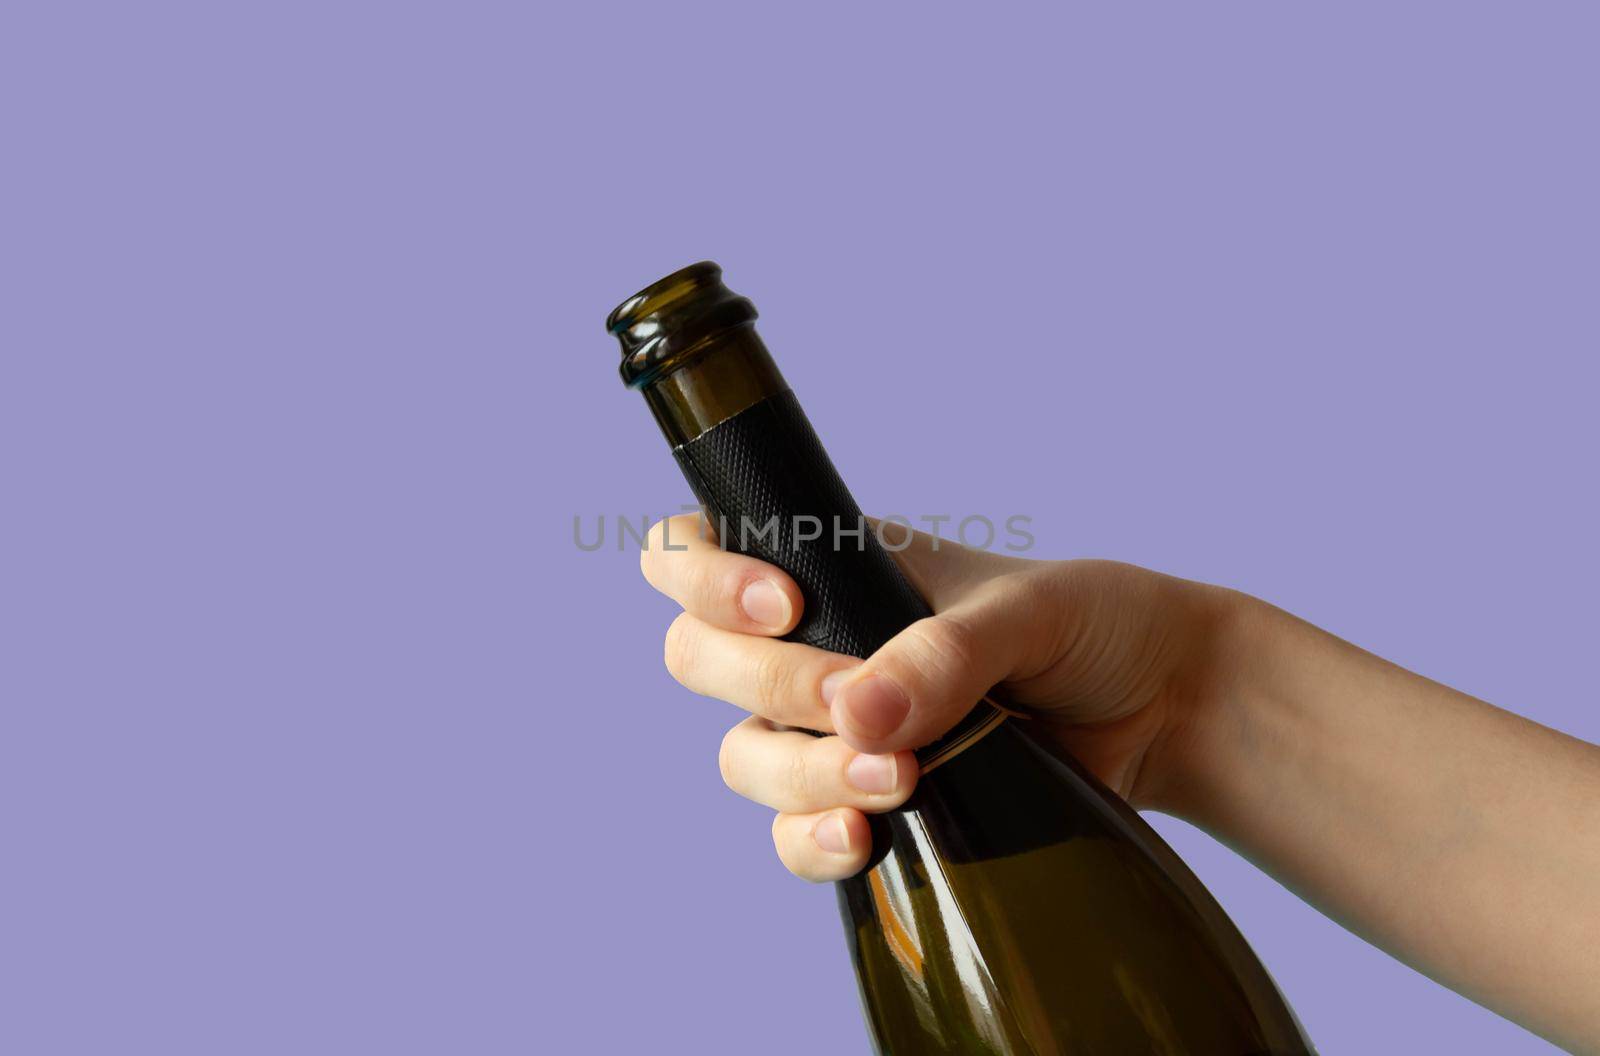 A woman's hand holding an open bottle of champagne on a lilac background. Very peri.